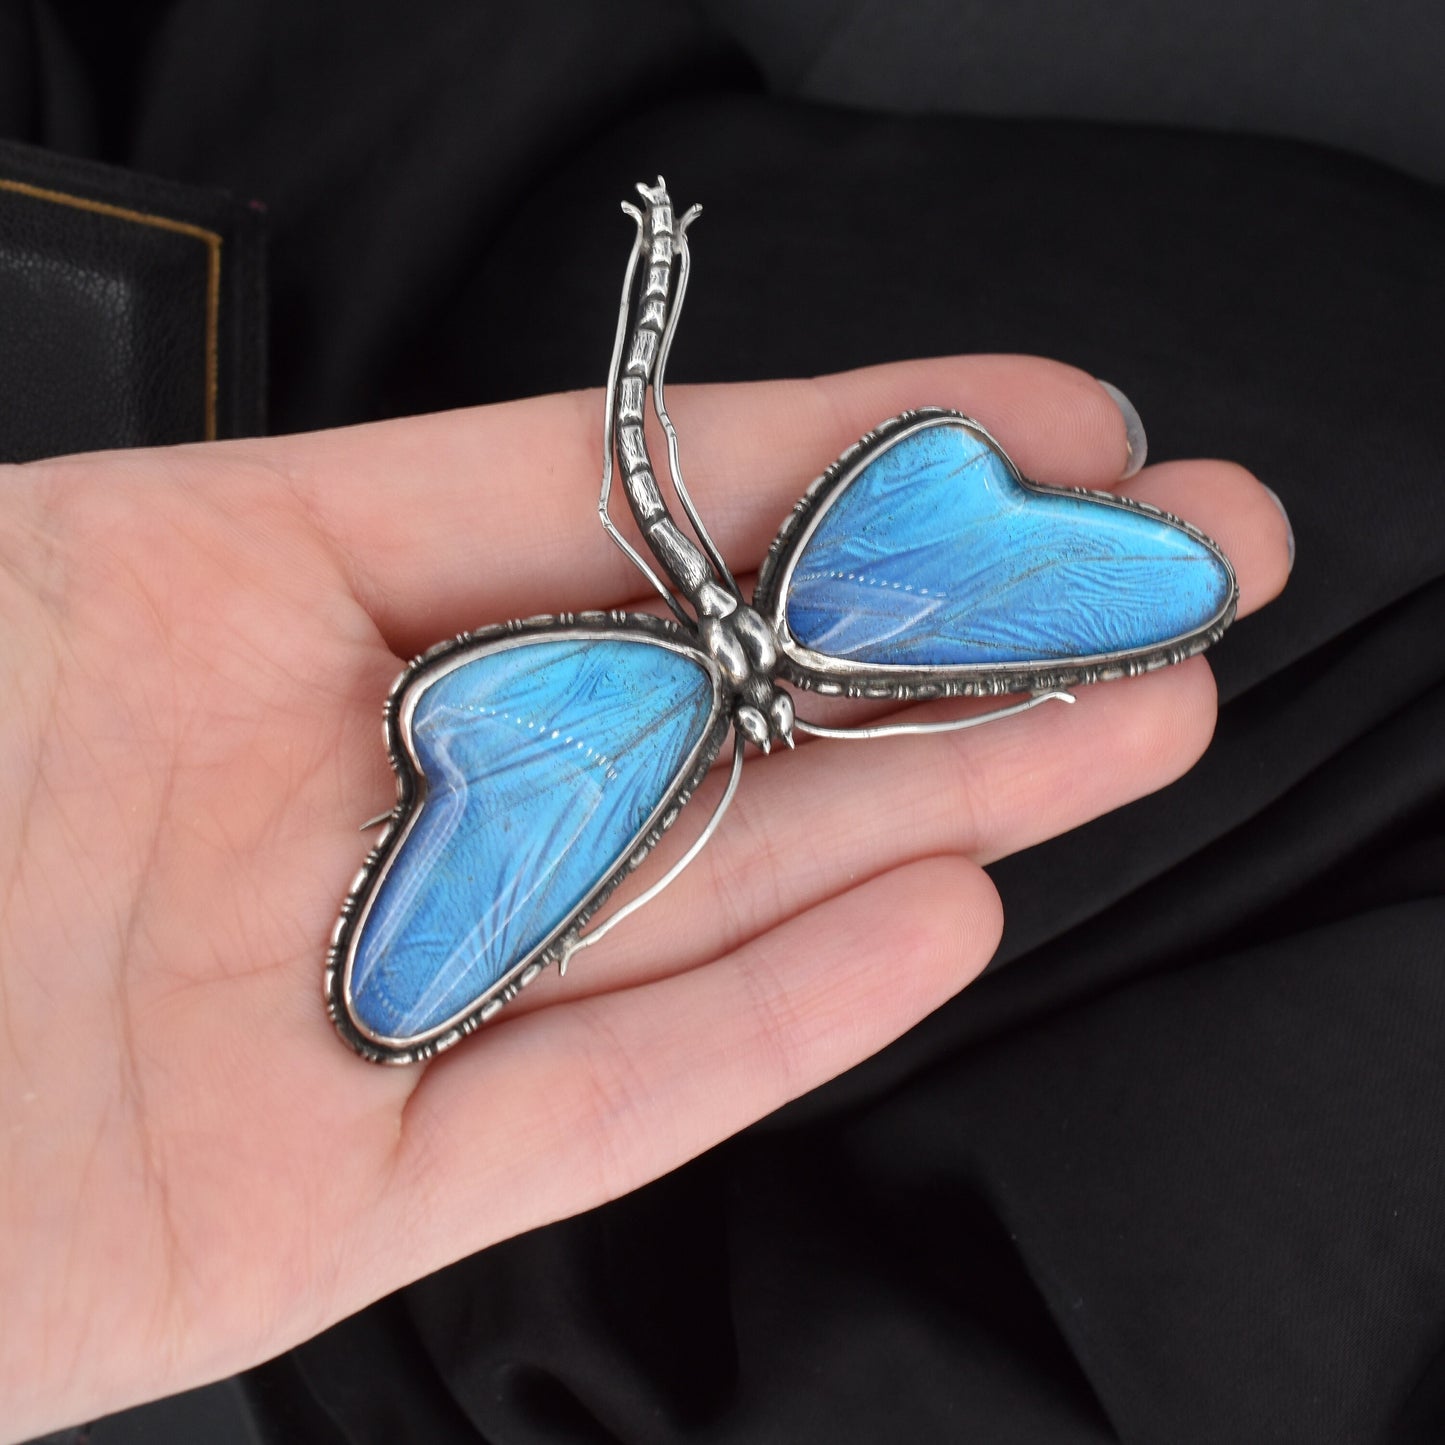 Antique Art Deco Silver Butterfly Wing Dragonfly Brooch